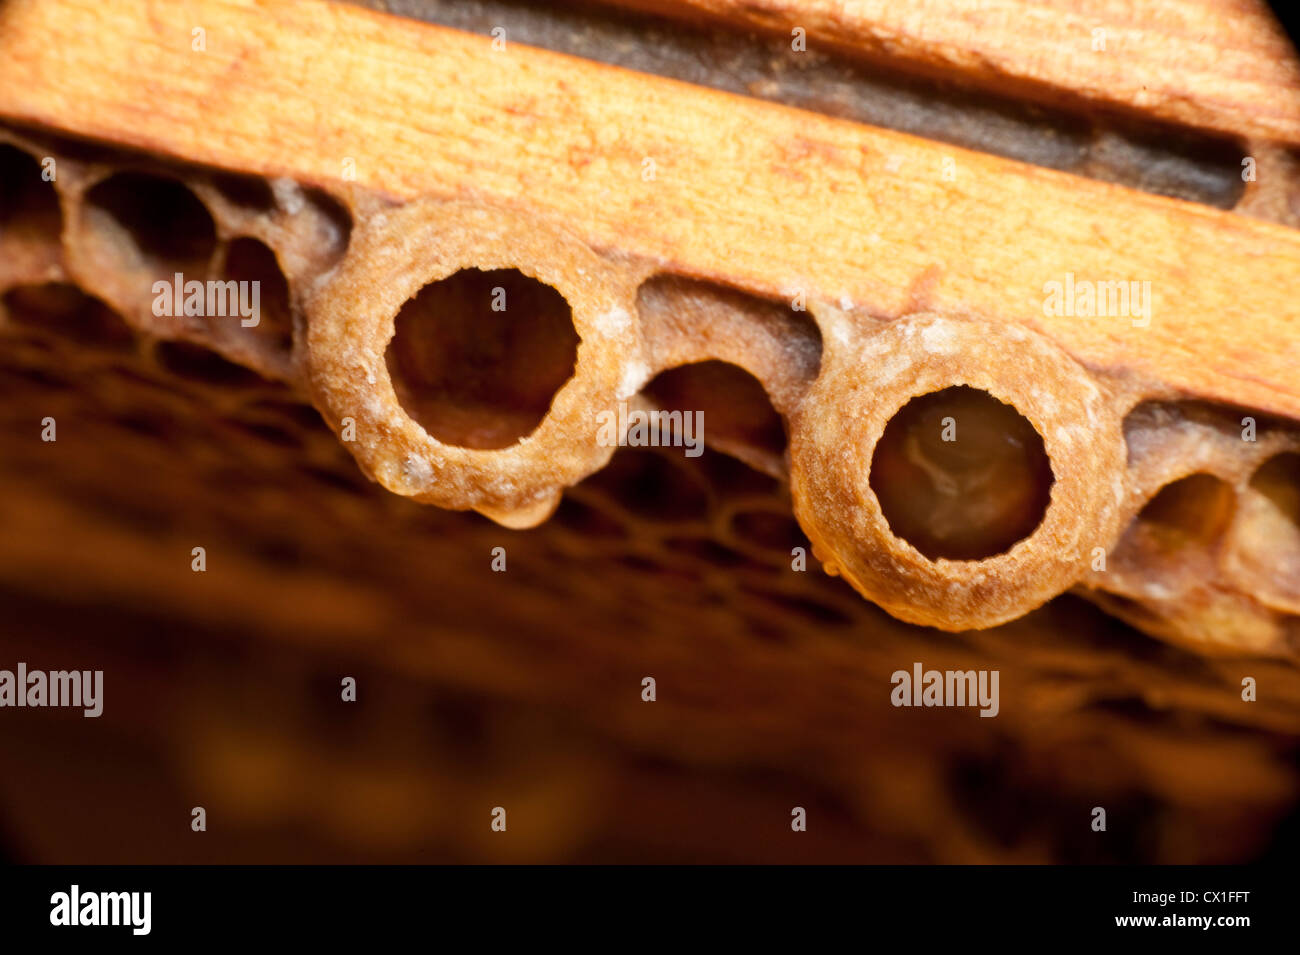 Honey Bee Apis mellifera Kent UK queen cell on honeycomb hive growing bee inside larvae stage Stock Photo